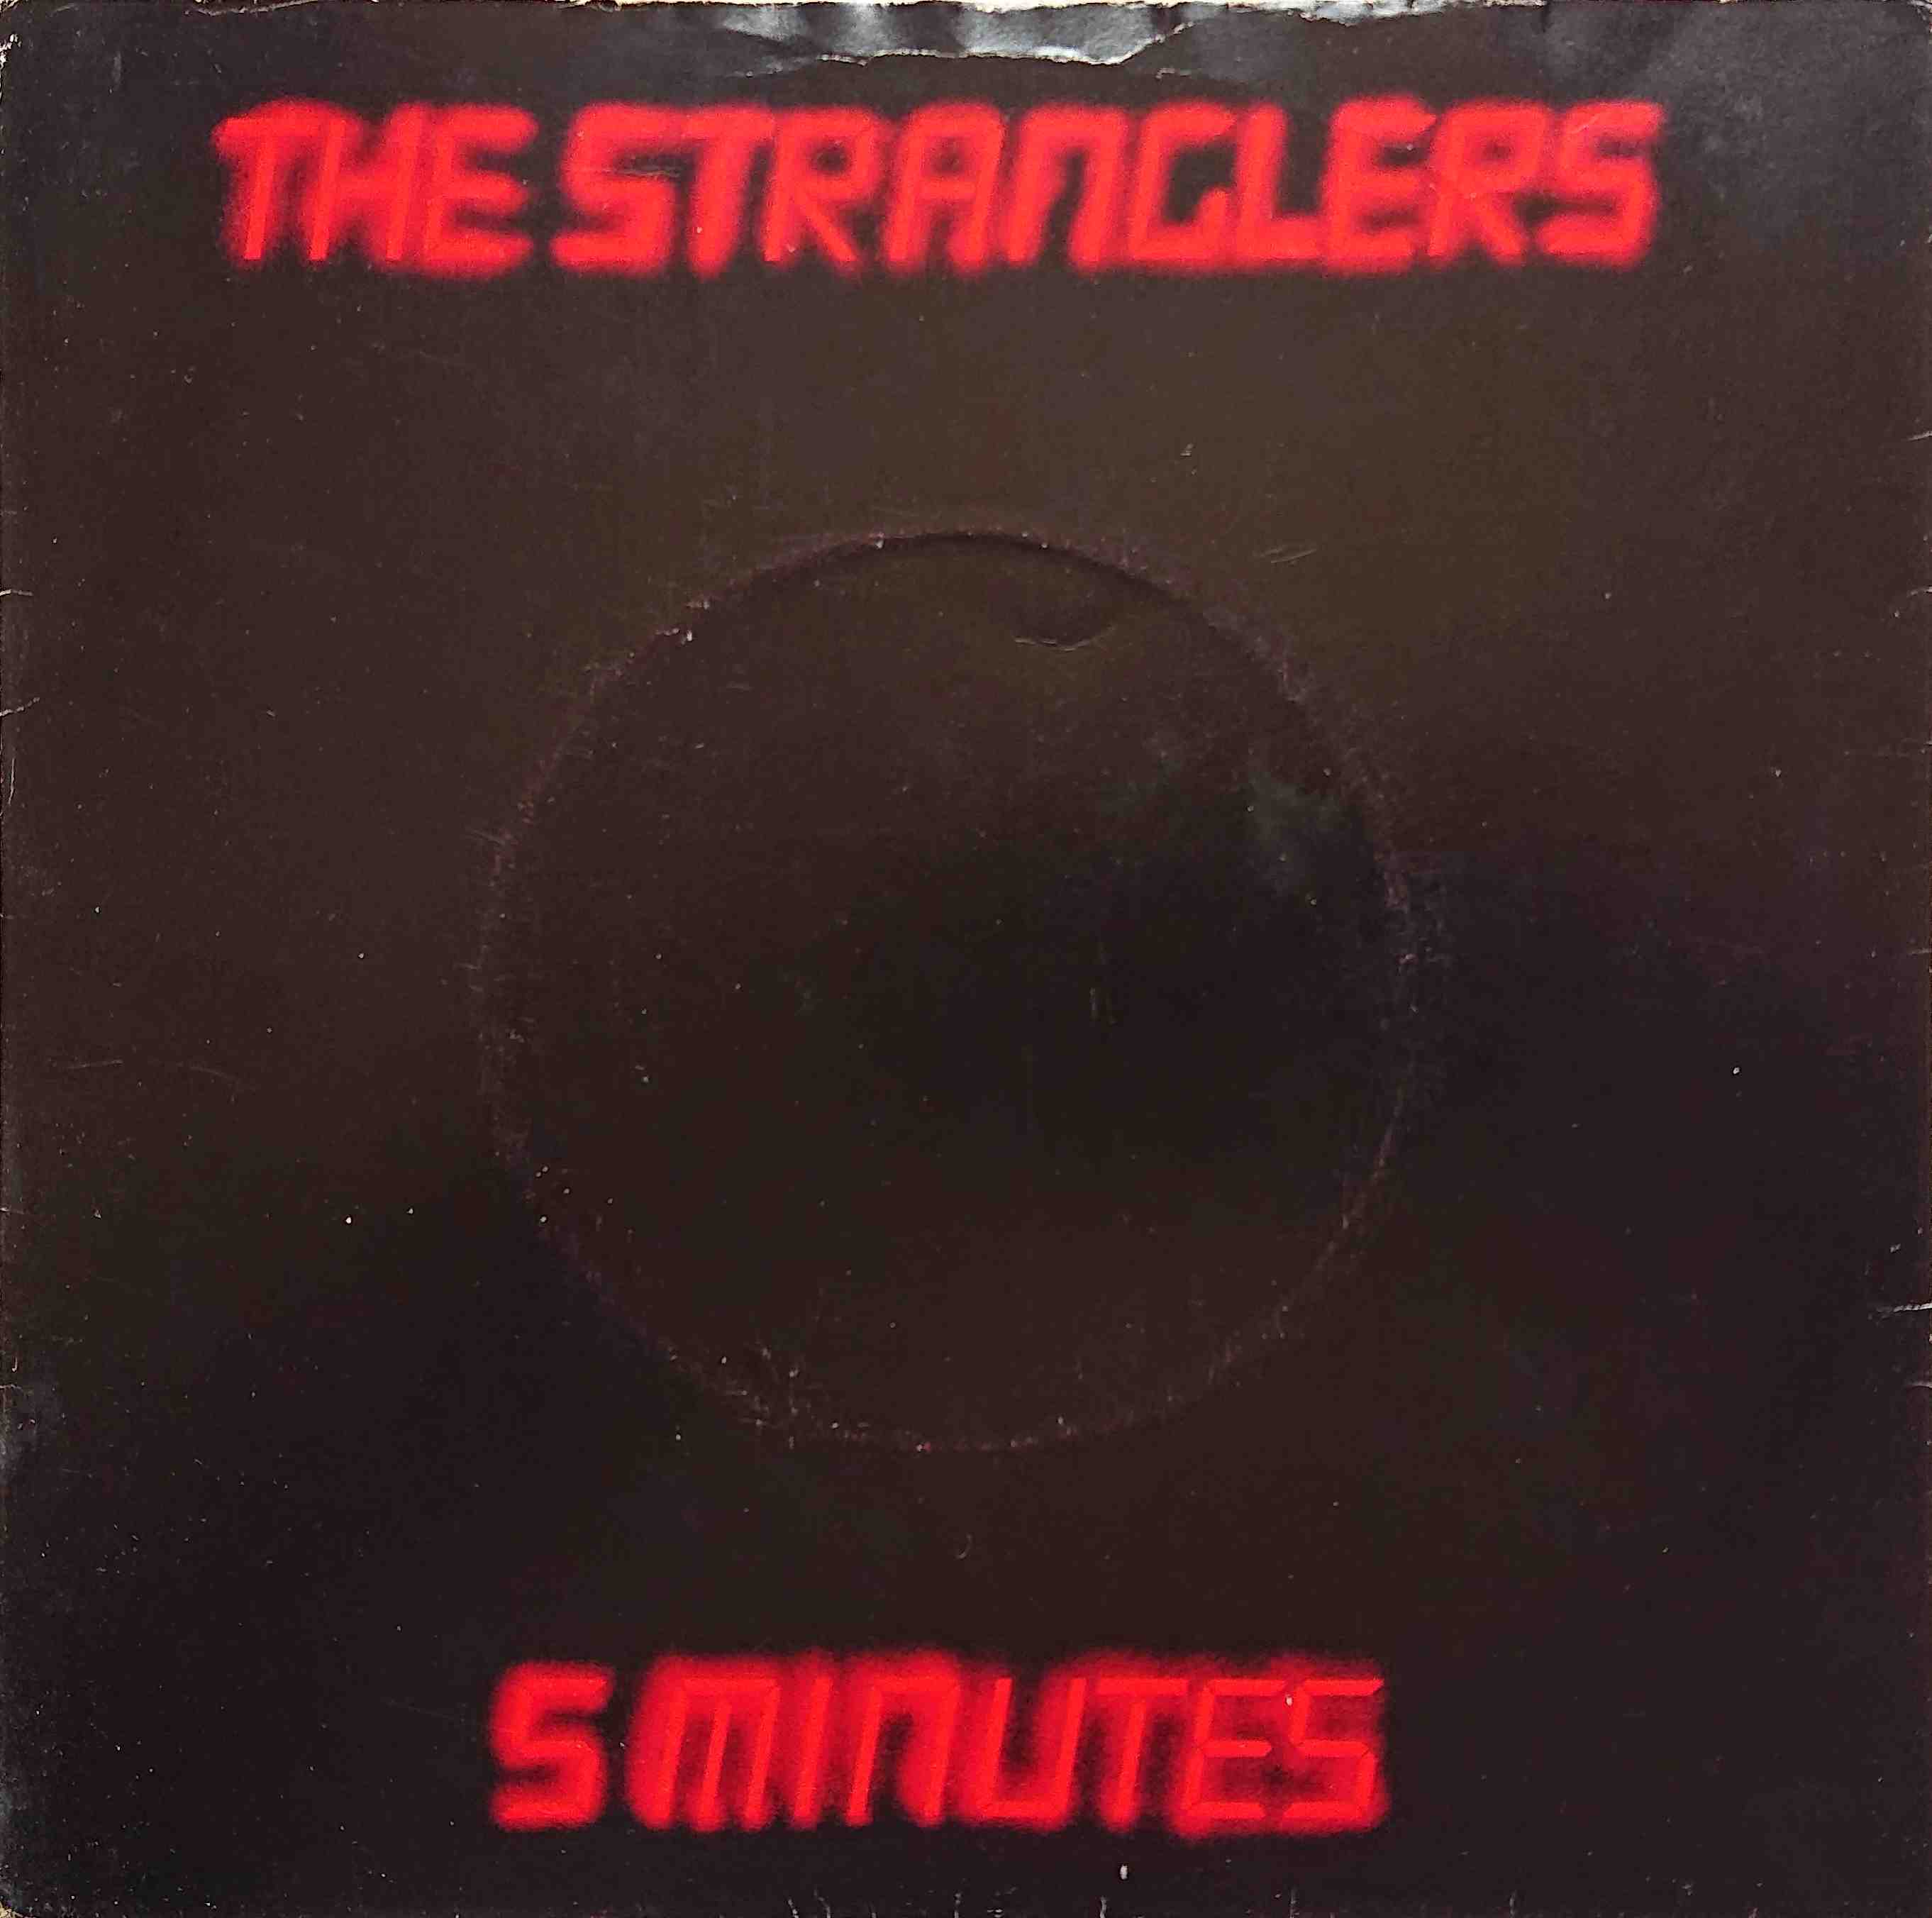 Picture of 5 minutes by artist The Stranglers  from The Stranglers singles